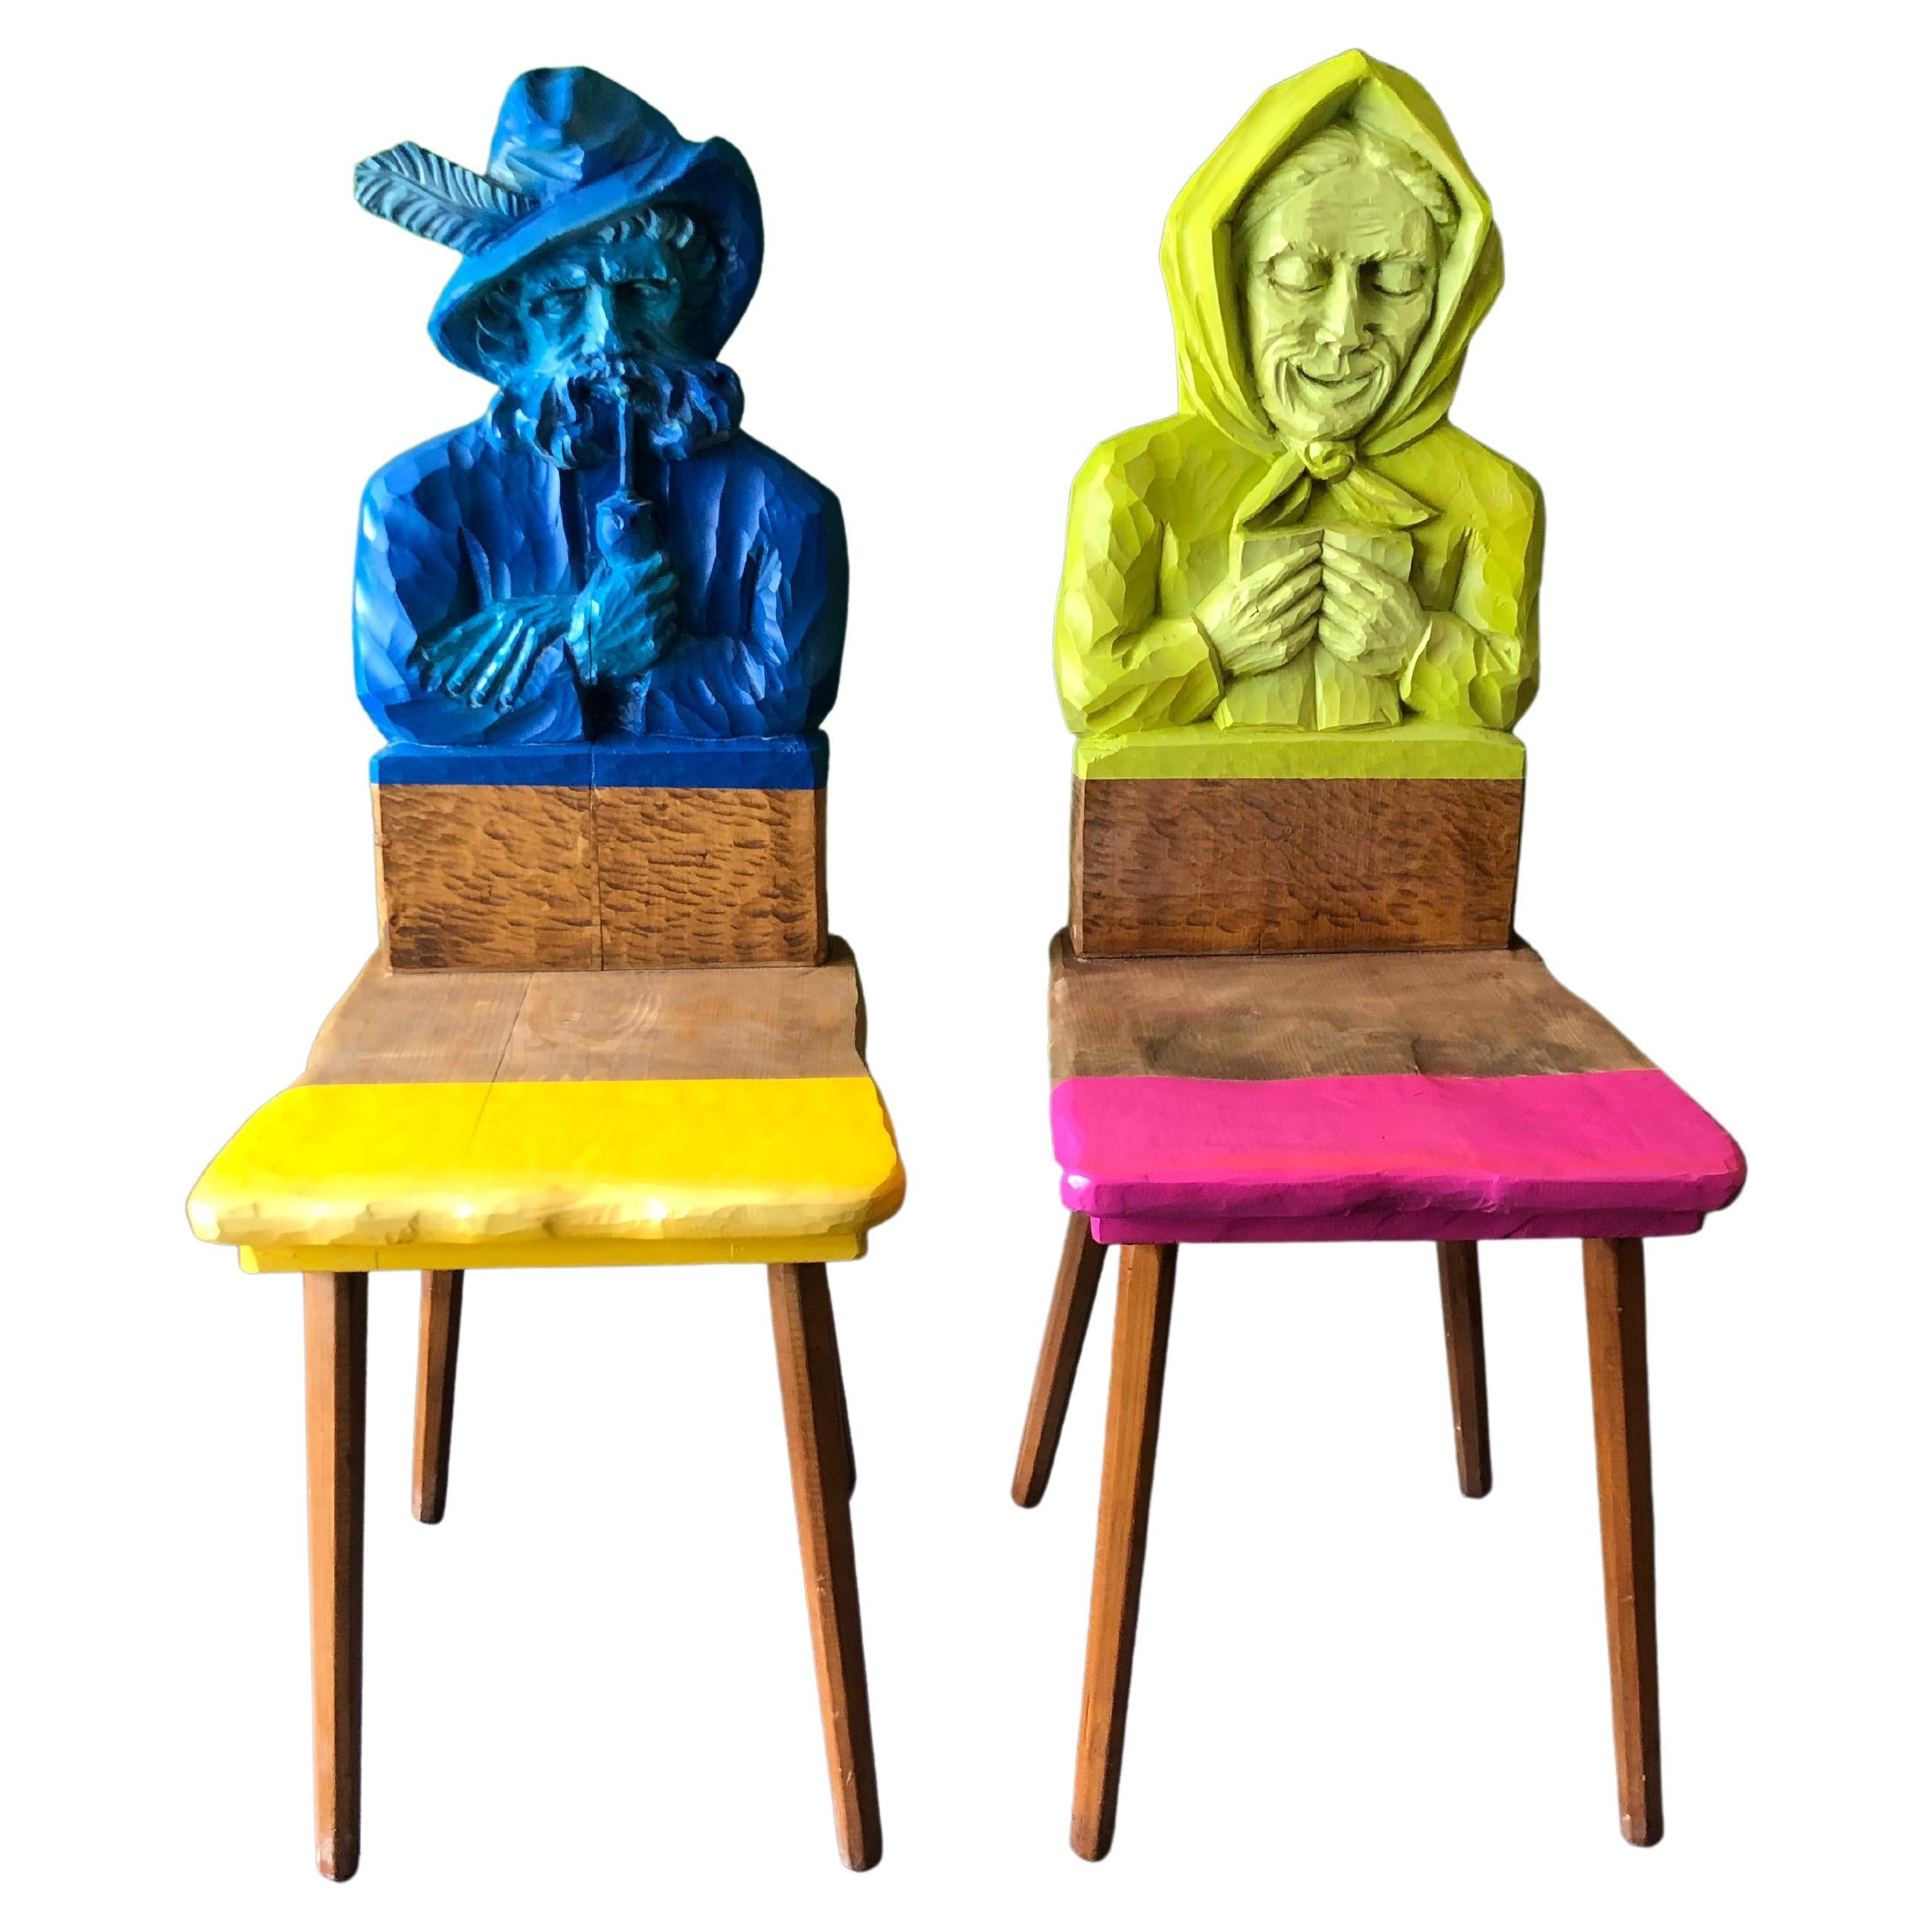 2 austrian marriage chairs/ Happy Woman Happy Life by Markus Friedrich Staab